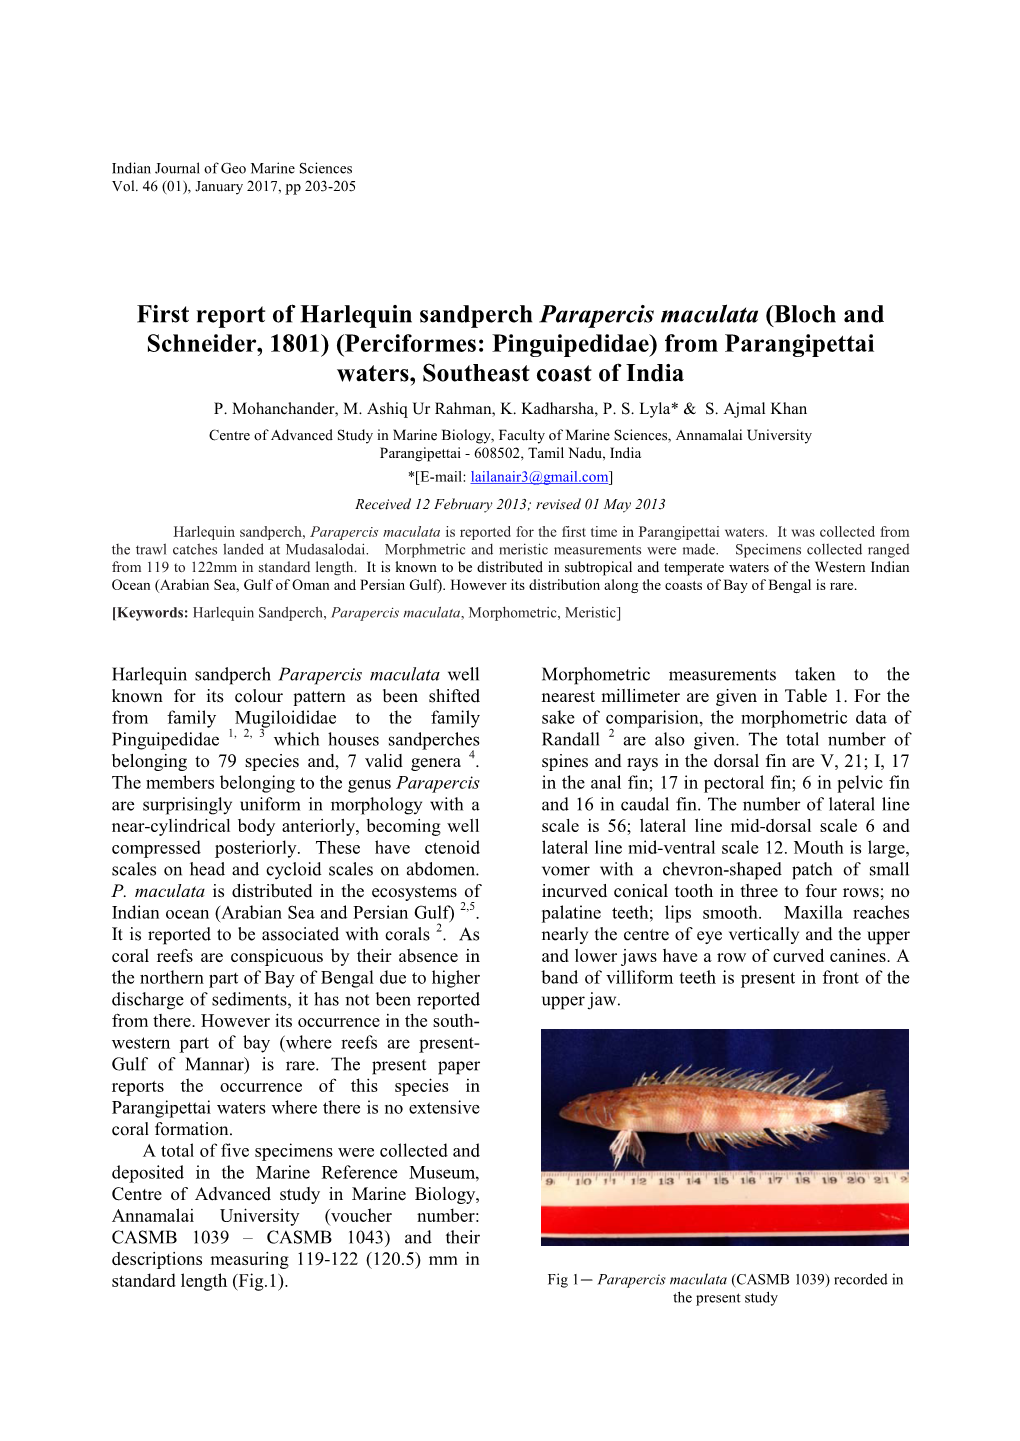 First Report of Harlequin Sandperch Parapercis Maculata (Bloch and Schneider, 1801) (Perciformes: Pinguipedidae) from Parangipettai Waters, Southeast Coast of India